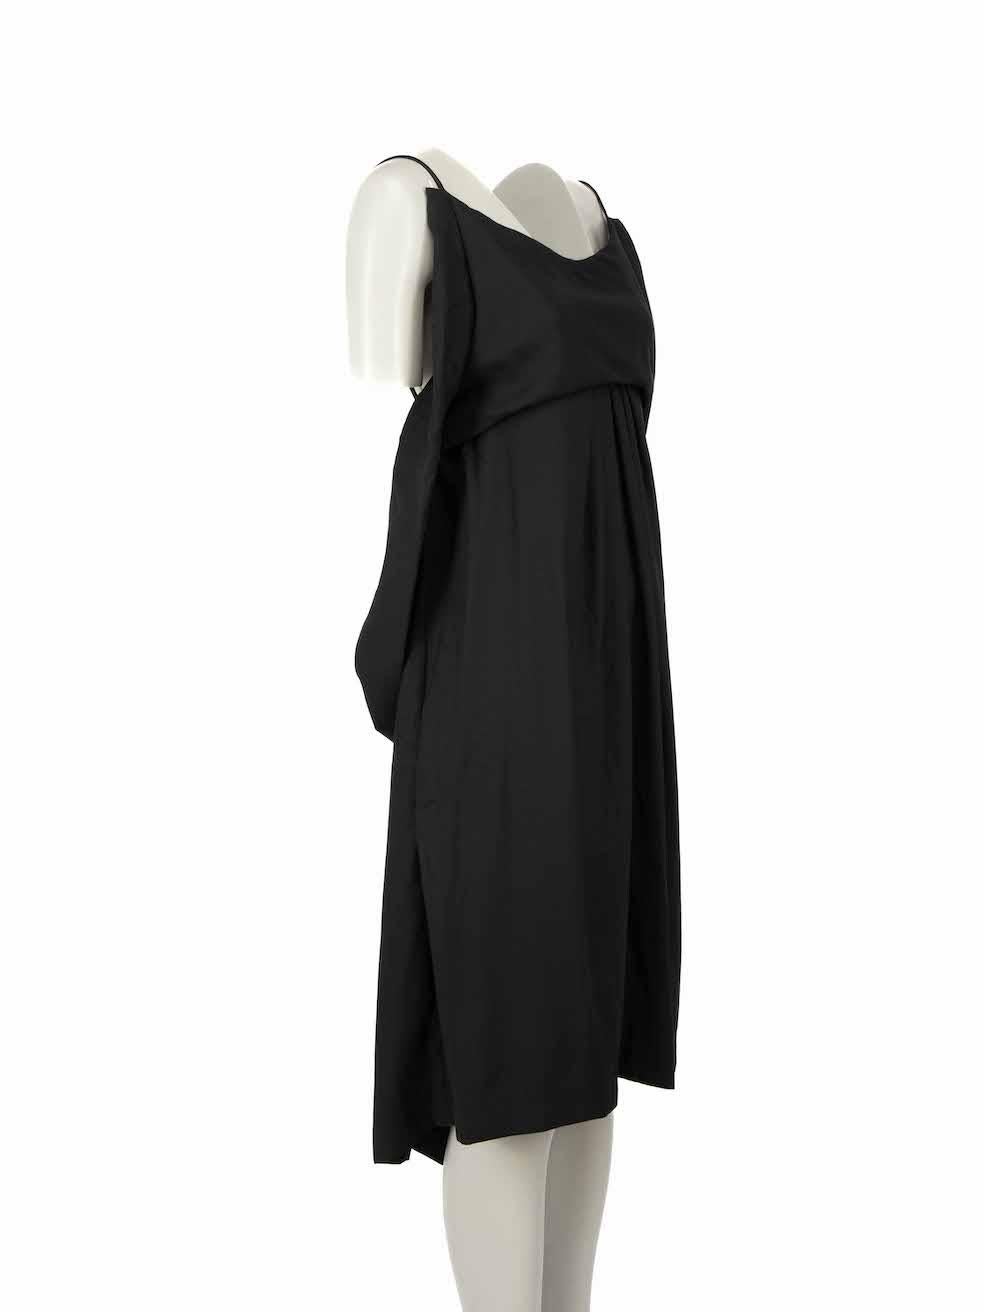 CONDITION is Very good. Hardly any visible wear to dress is evident on this used Balenciaga designer resale item.
 
Details
Black
Wool
Dress
Sleeveless
2x Side pockets
Internal hooked strap
Open back
Drawstring back detail
Round neck
 
Made in